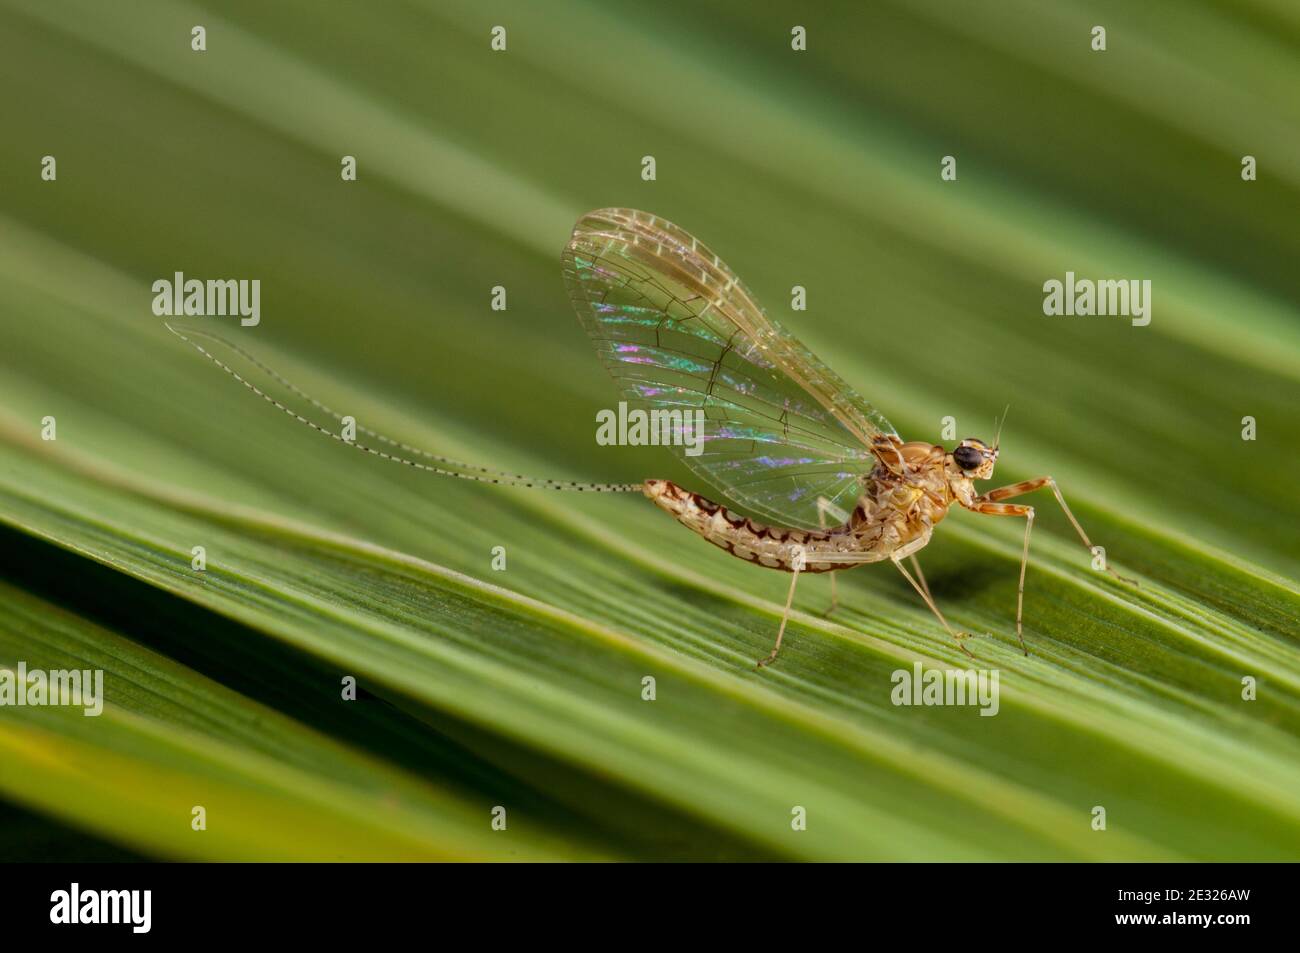 A spinner of the pond olive mayfly (Cloeon dipterum) perched on a leaf in a garden in Sowerby, Thirsk, North Yorkshire. July. Stock Photo